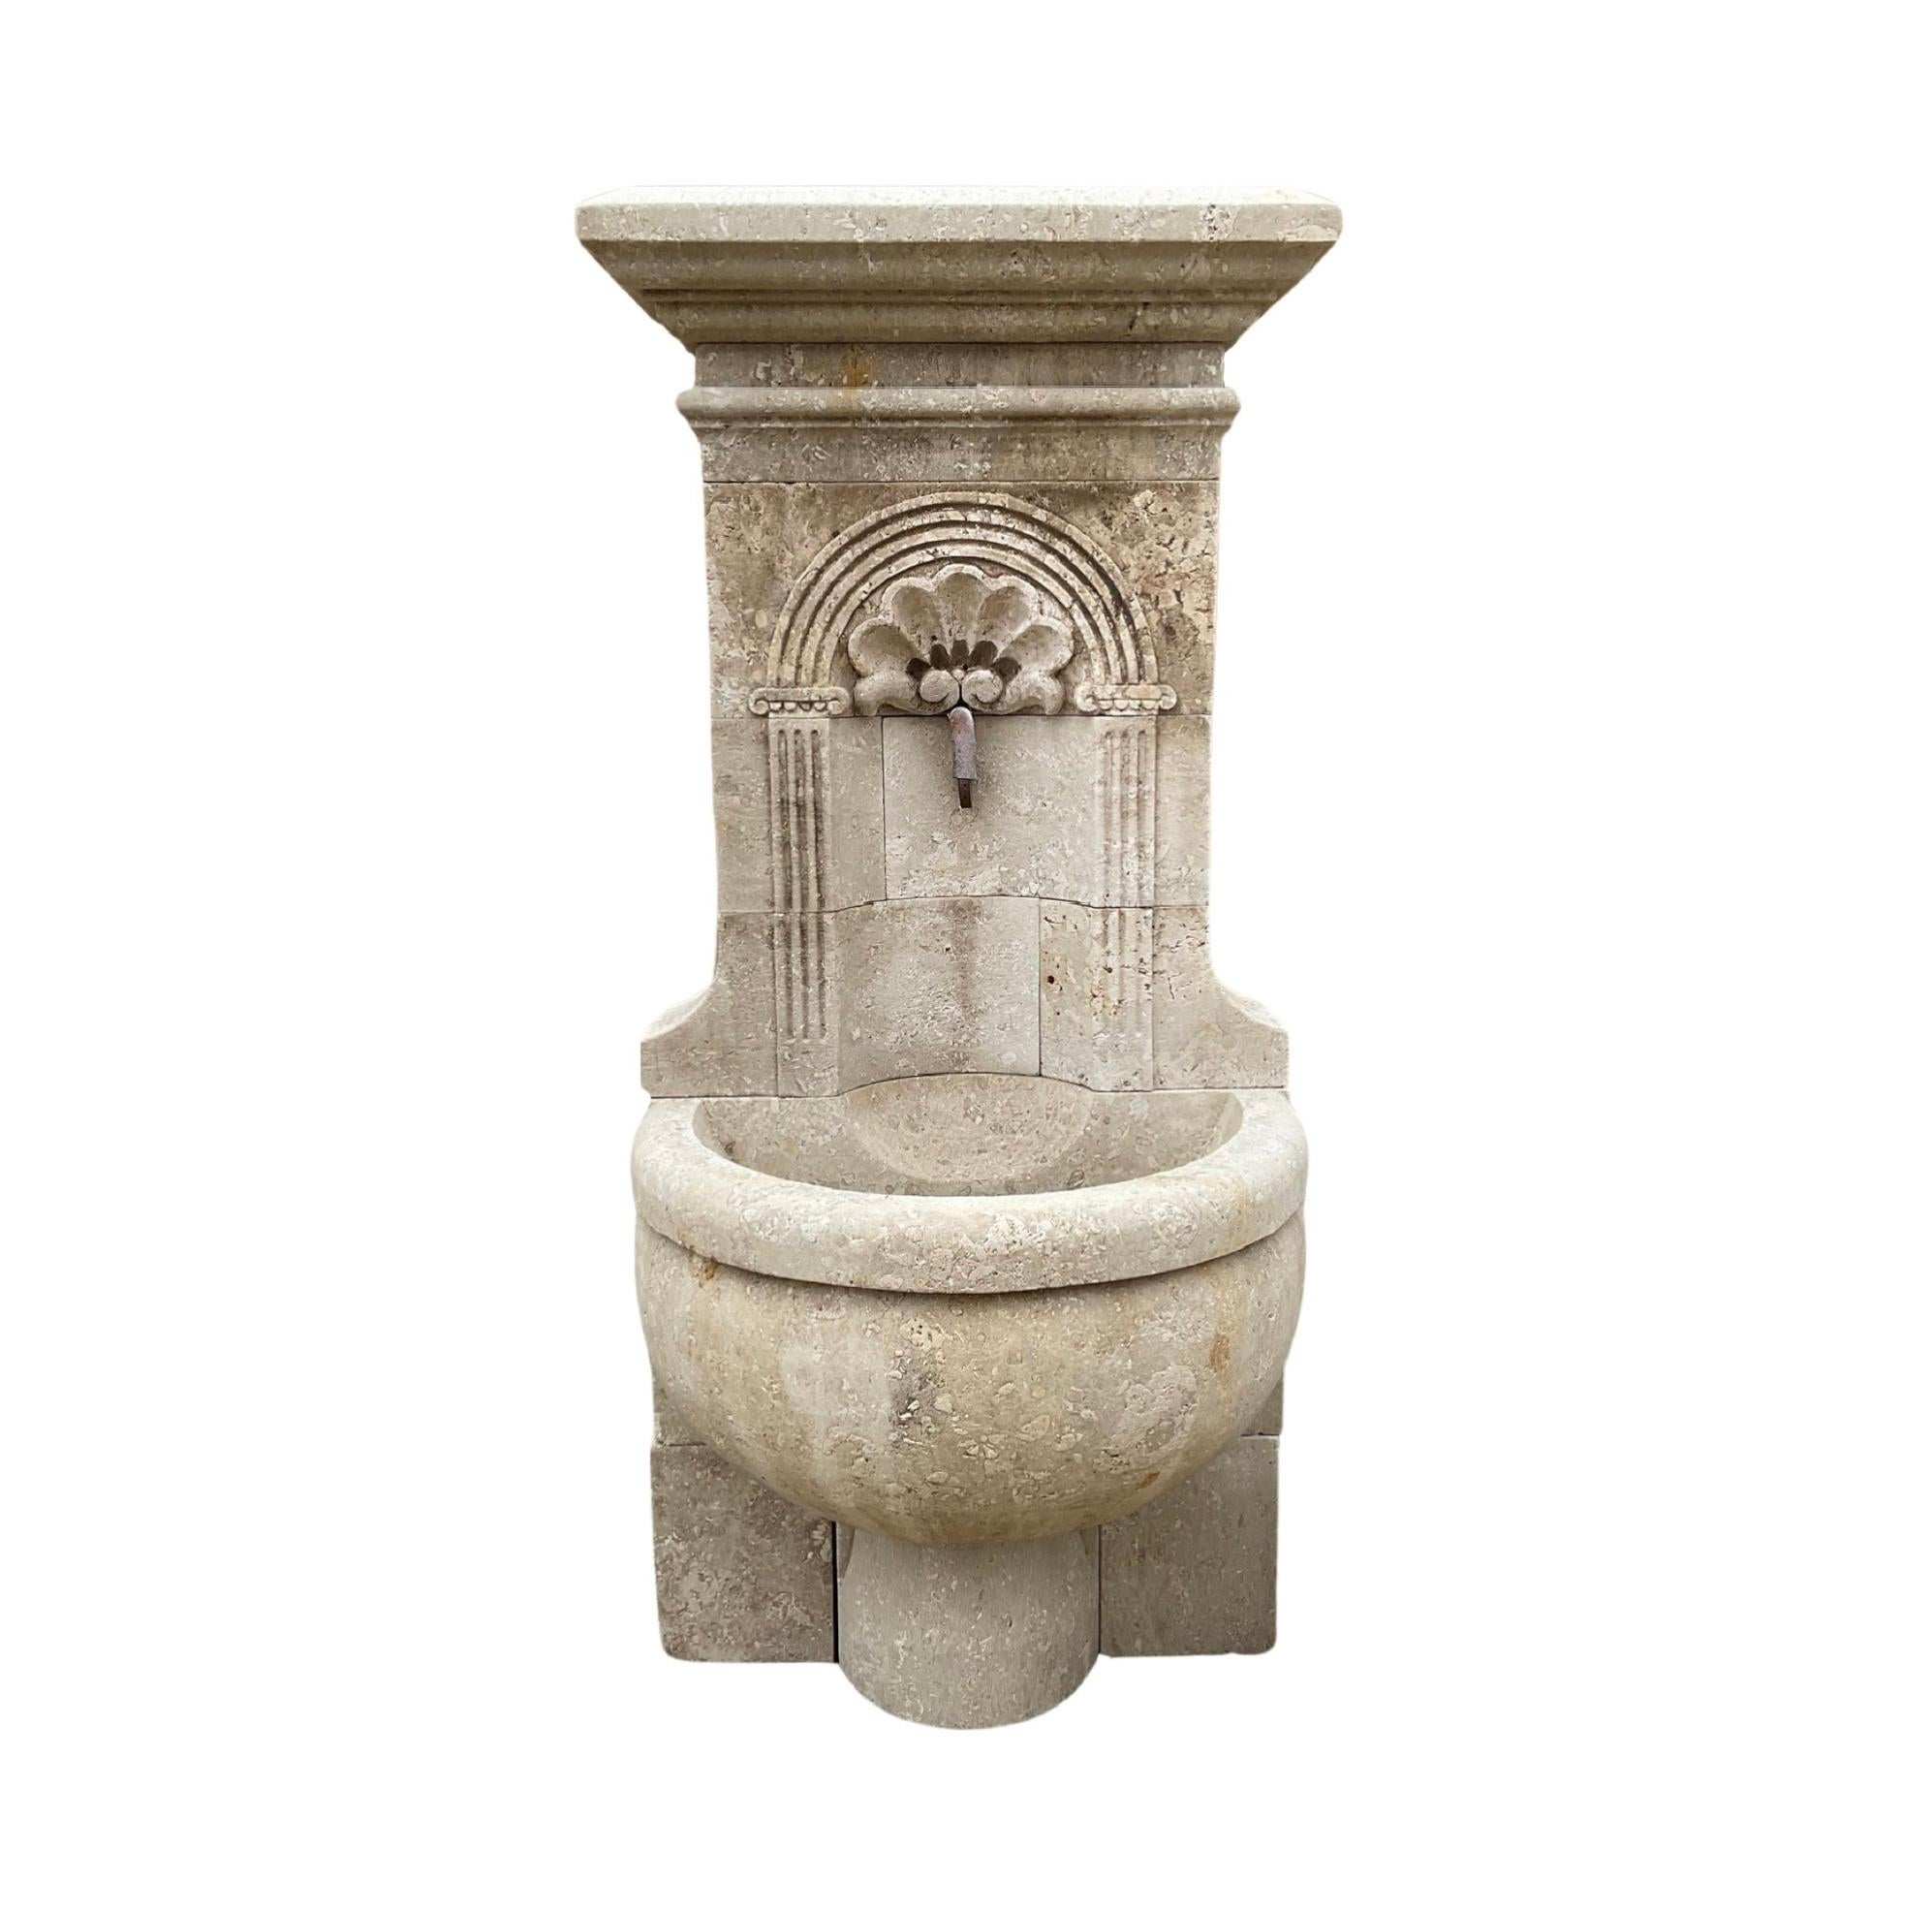 Add a touch of elegance to your space with this 1950s French Limestone Wall Fountain. Made from authentic limestone, its intricate shell-like carvings create a unique and refined look. The semi-circular basin in the front center adds a touch of